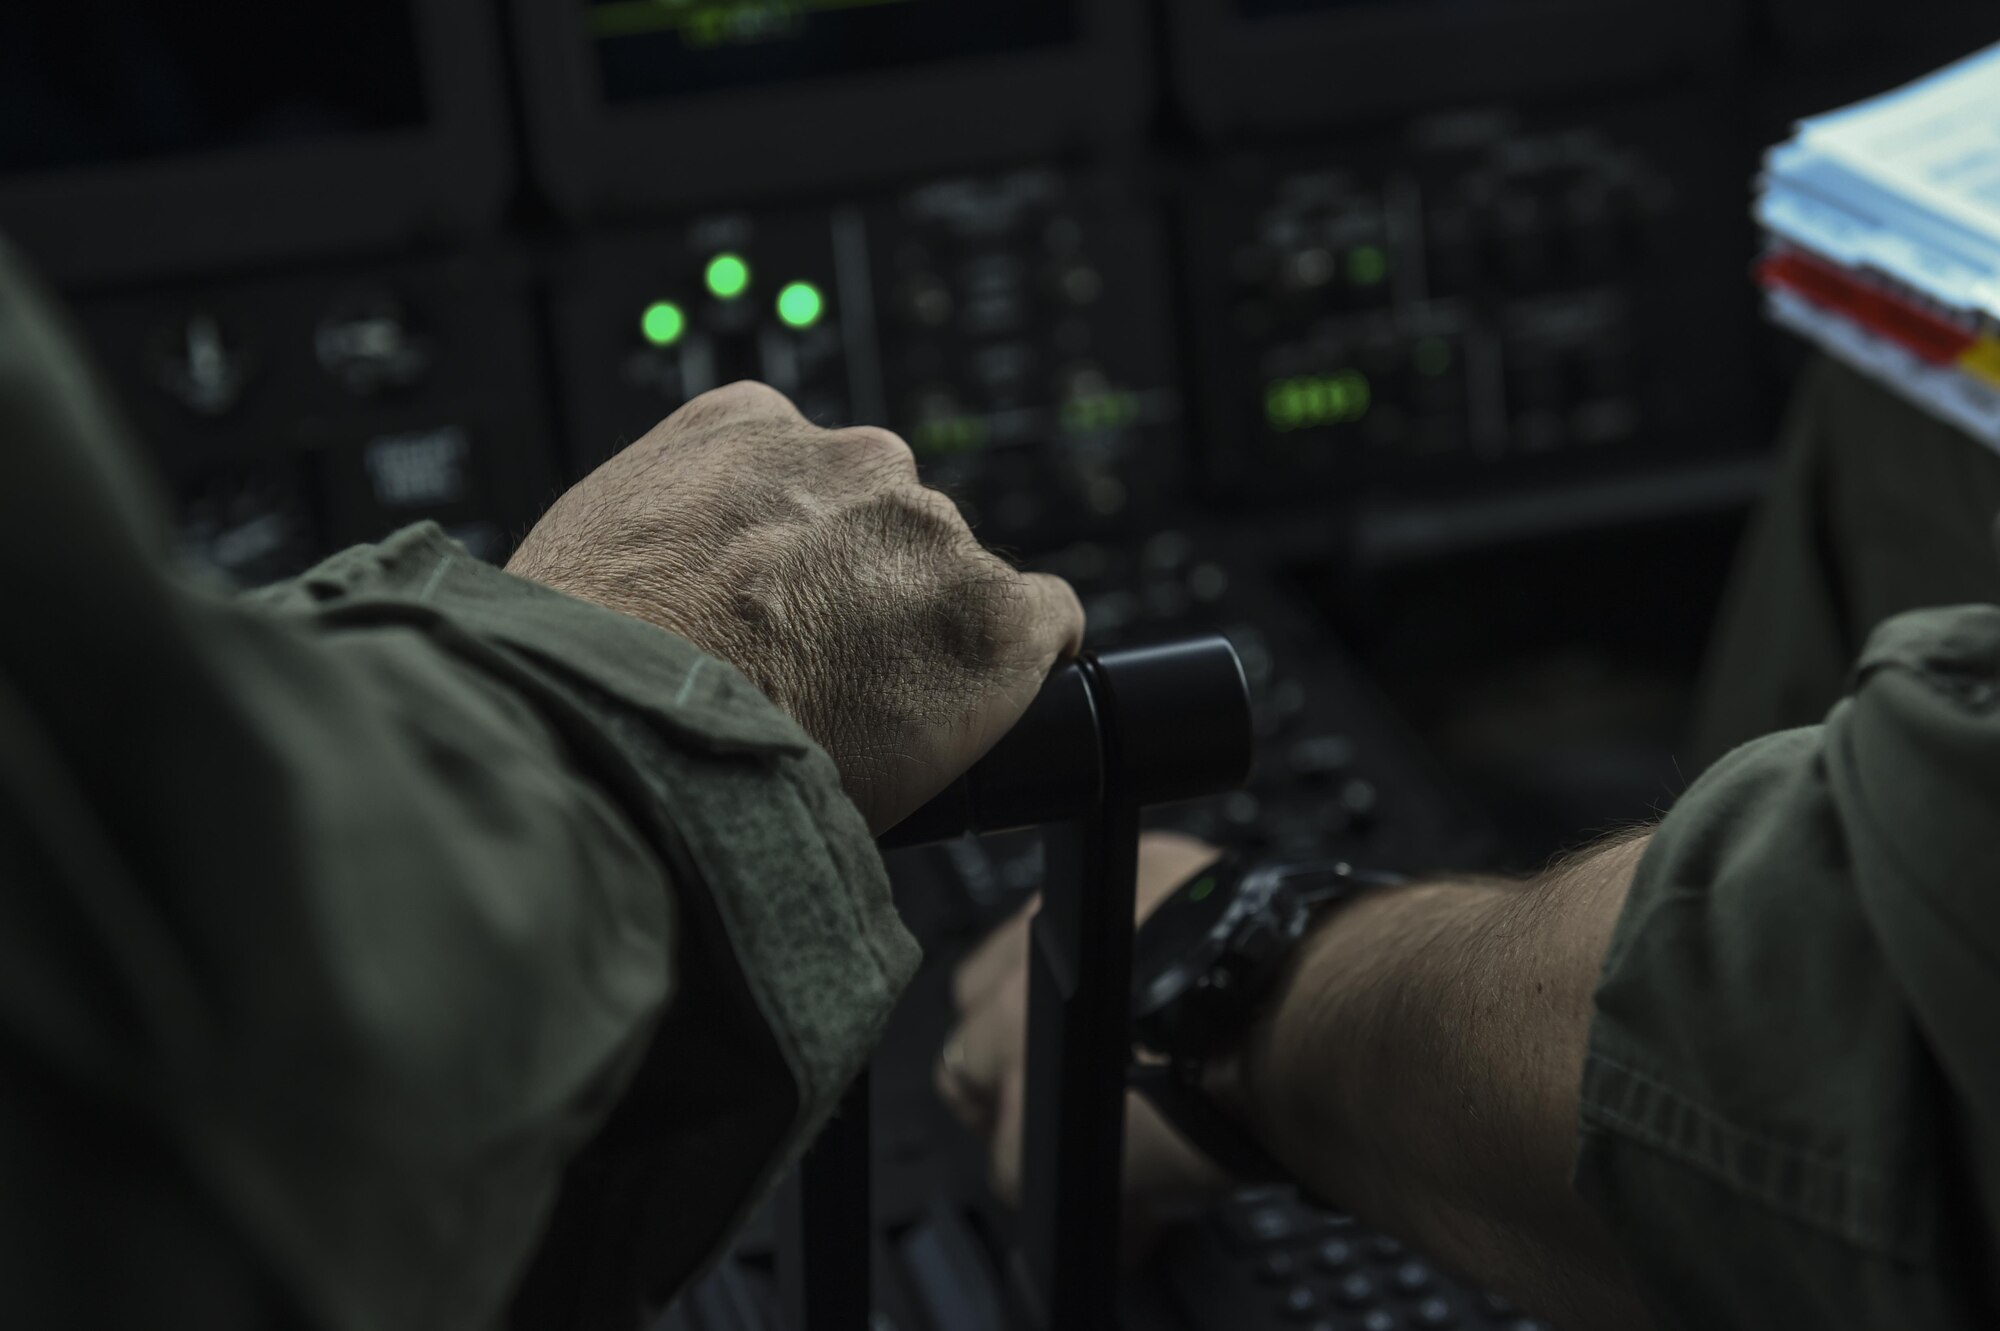 Col. Sean Farrell, commander of the 1st Special Operations Wing, takes hold of the throttle for takeoff at Lockheed Martin in Marietta, Ga., Dec. 11, 2015. The MC-130J will undergo modifications to become an AC-130J Ghostrider, which will provide the 1 SOW with close air support and air interdiction capabilities. (U.S. Air Force photo by Senior Airman Ryan Conroy)